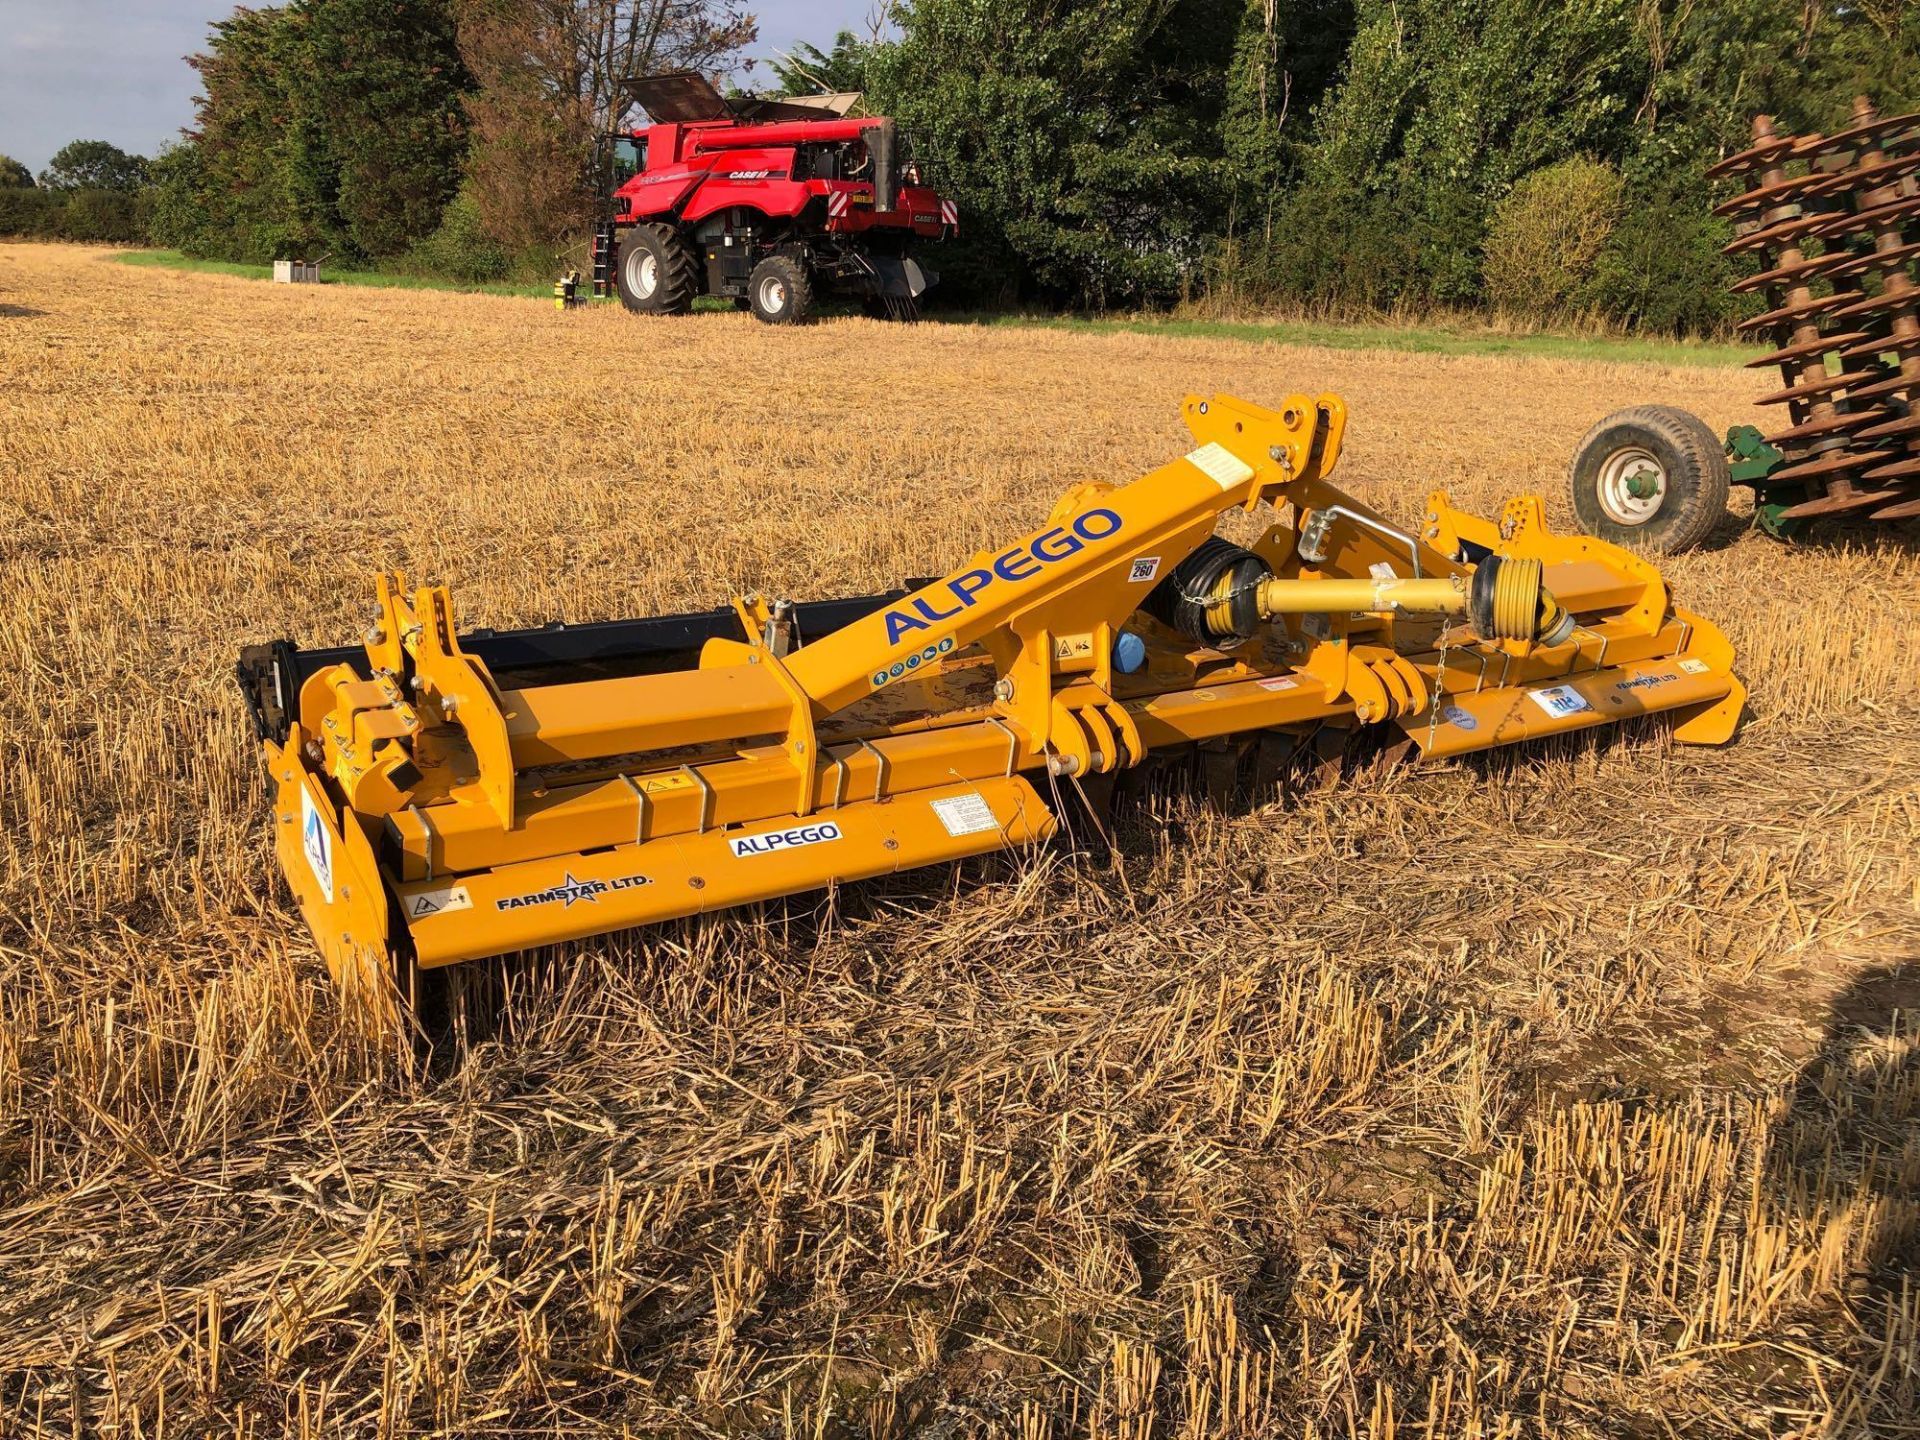 2019 Alpego RK400 4m power harrow with rear crumbler. Serial No: 000047997.  Manual in the office.